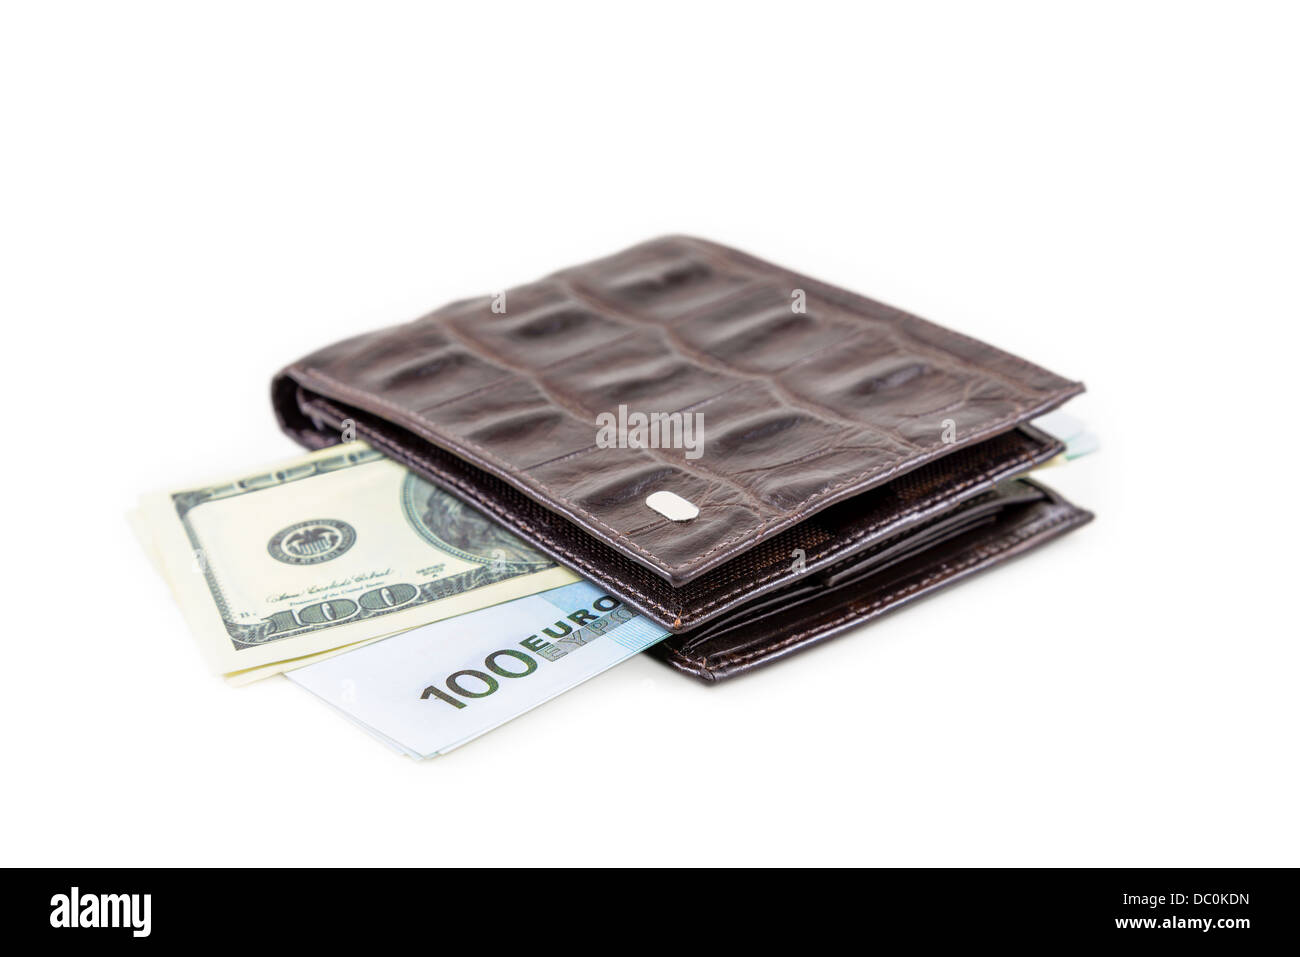 The brown leather wallet with euro and dollars is photographed on the close-up Stock Photo